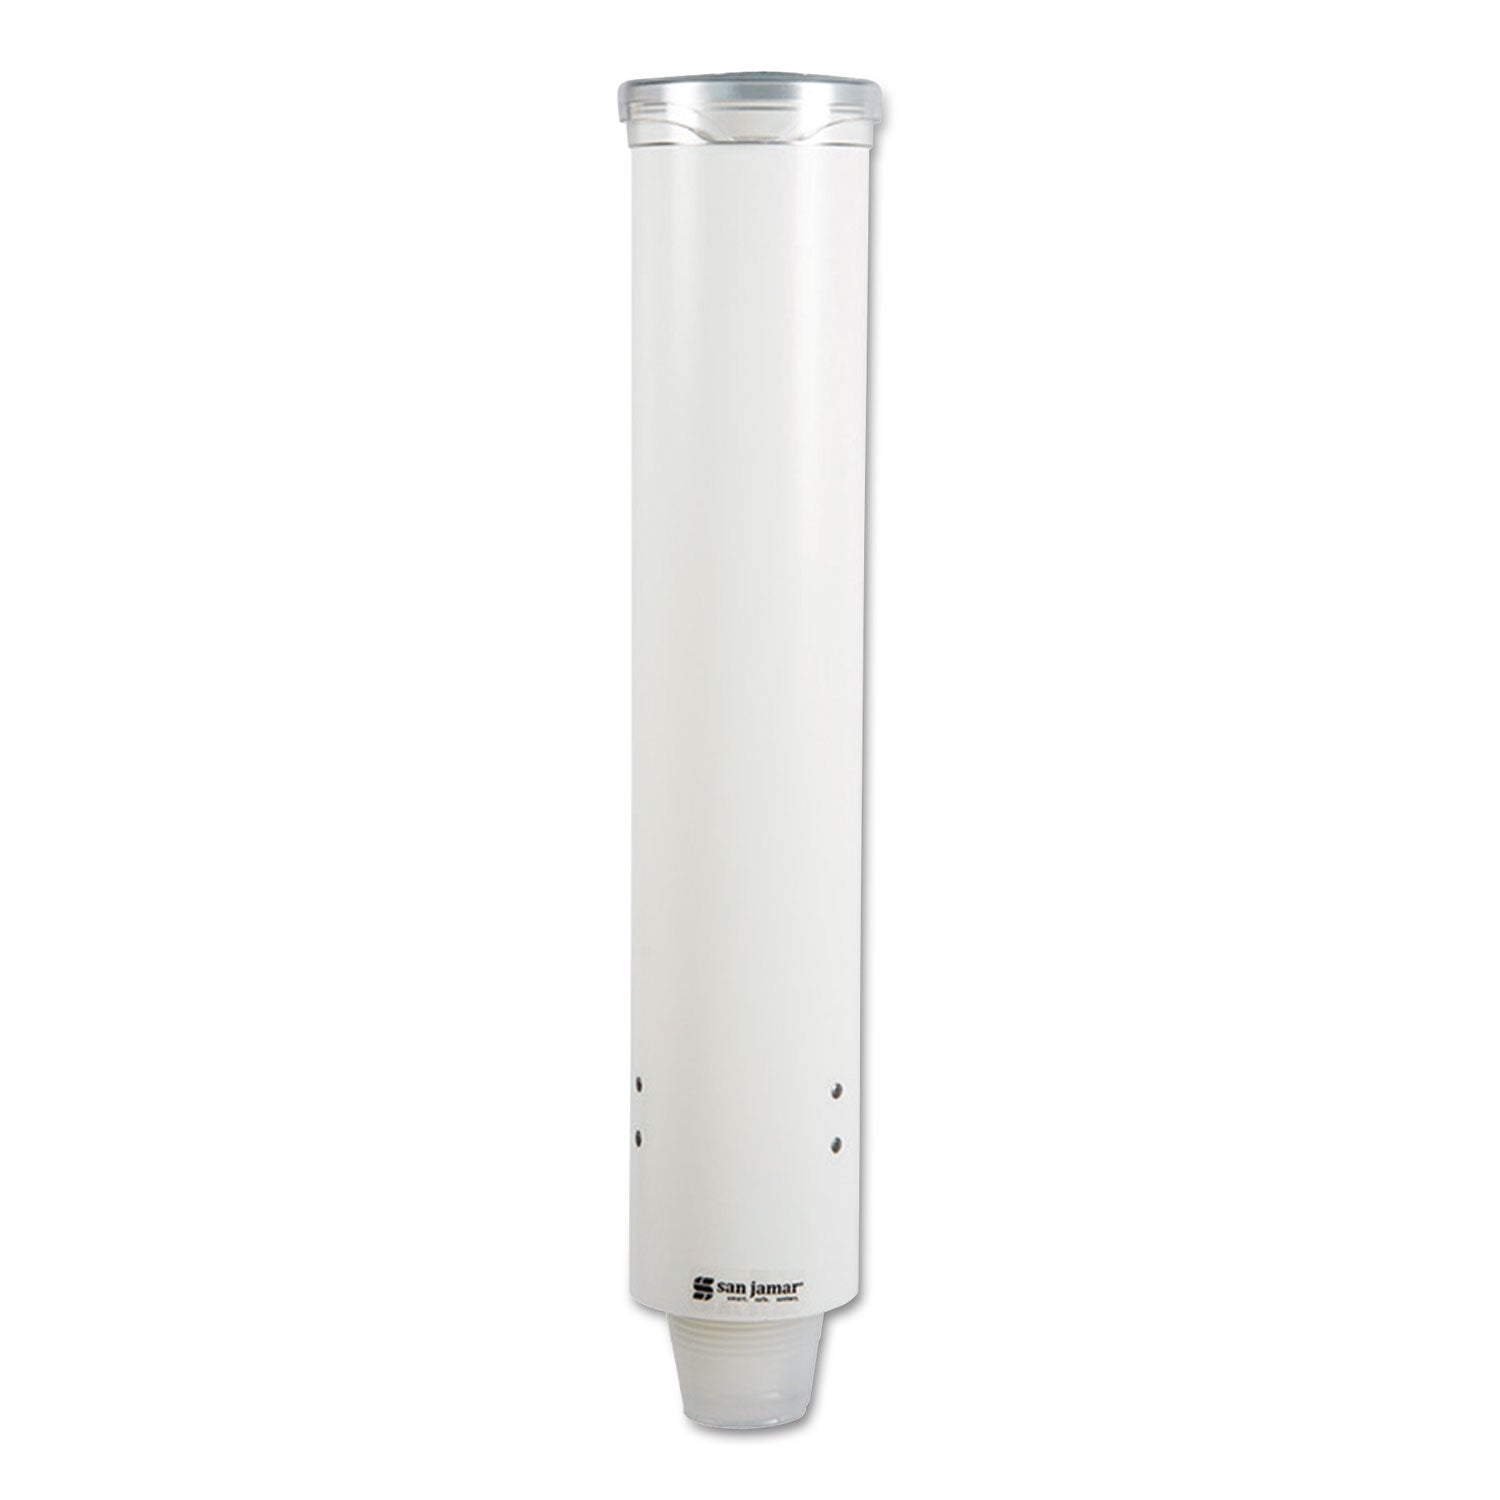 small-pull-type-water-cup-dispenser-for-5-oz-cups-white_sjmc4160wh - 1